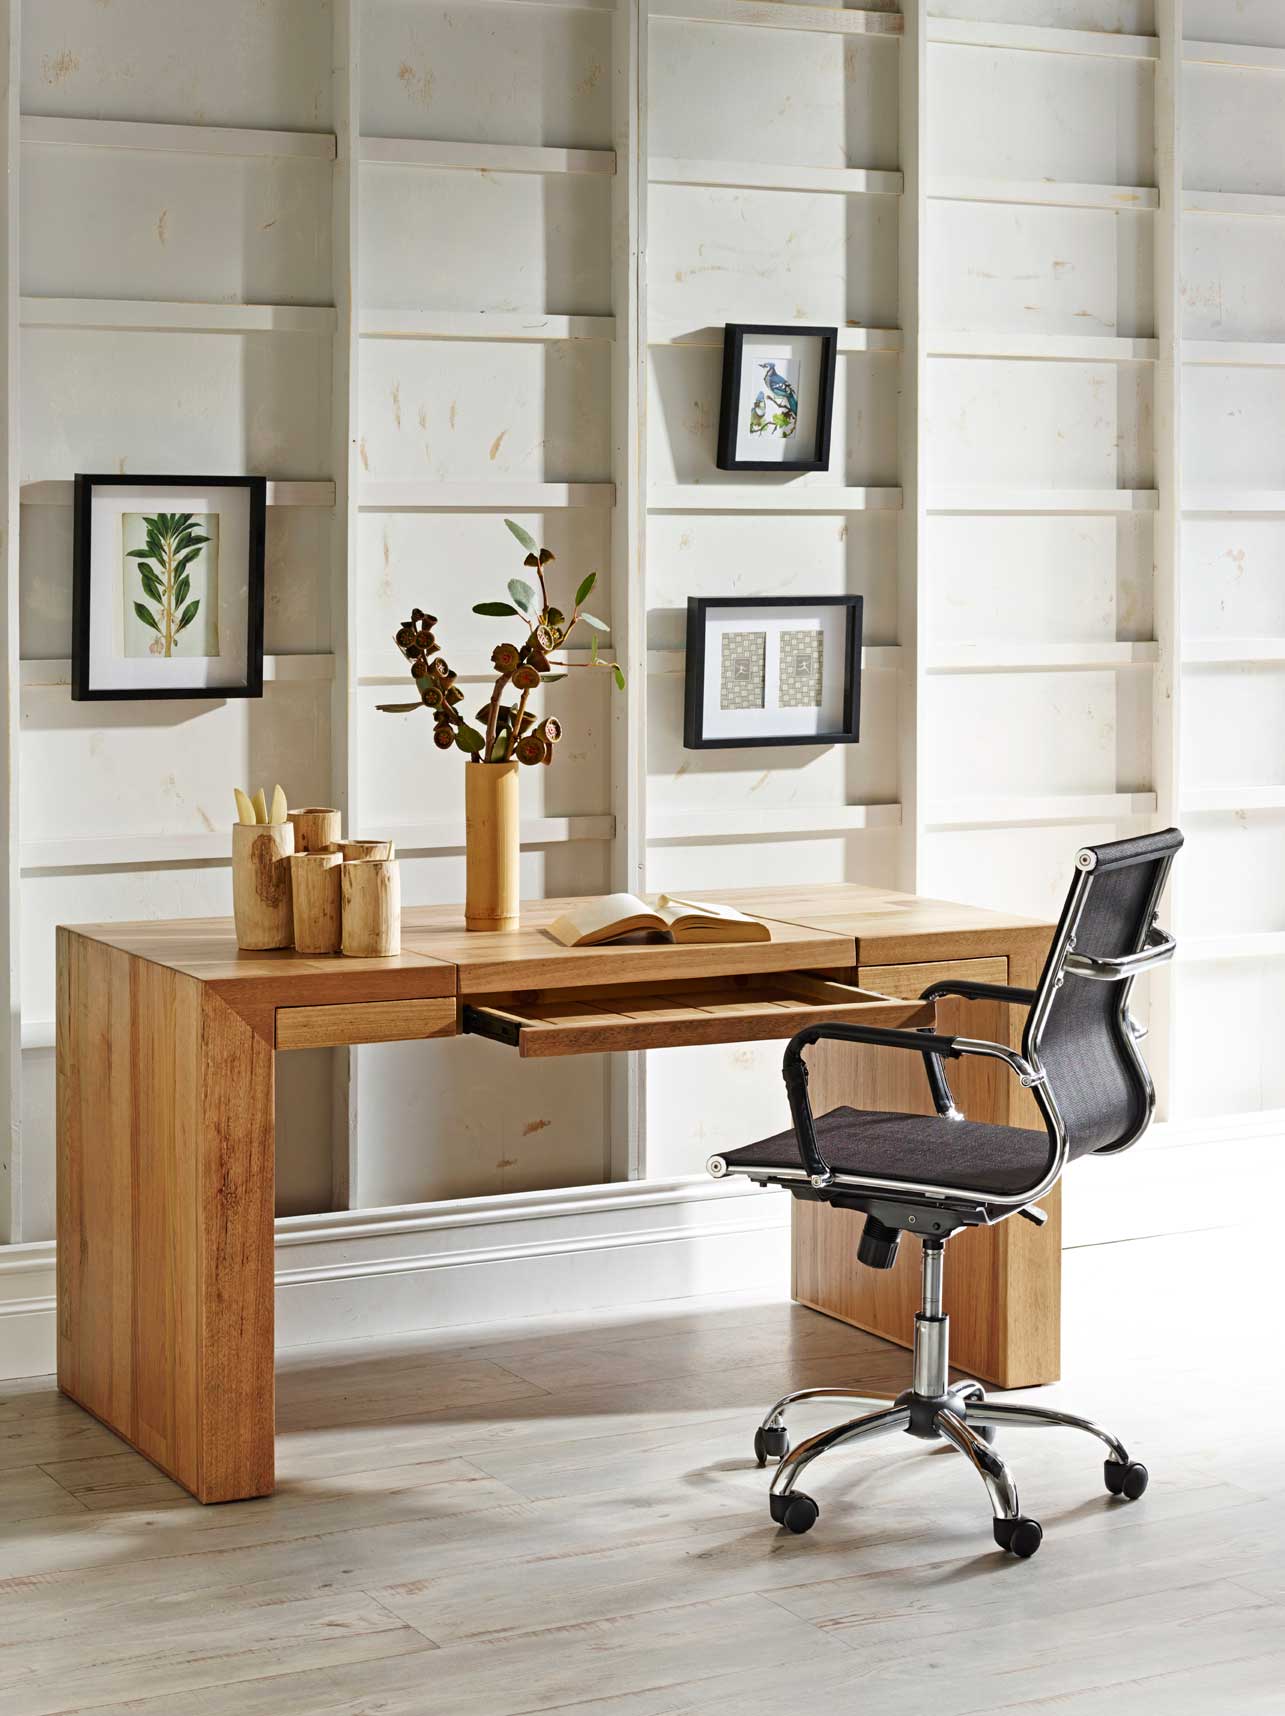 Office Design Office Amusing Small Office Design With Modern Office Furniture Using Wooden Computer Desk And Minimalist Office Chair Office Small Office Design In Lovely And Cheerful Nuance